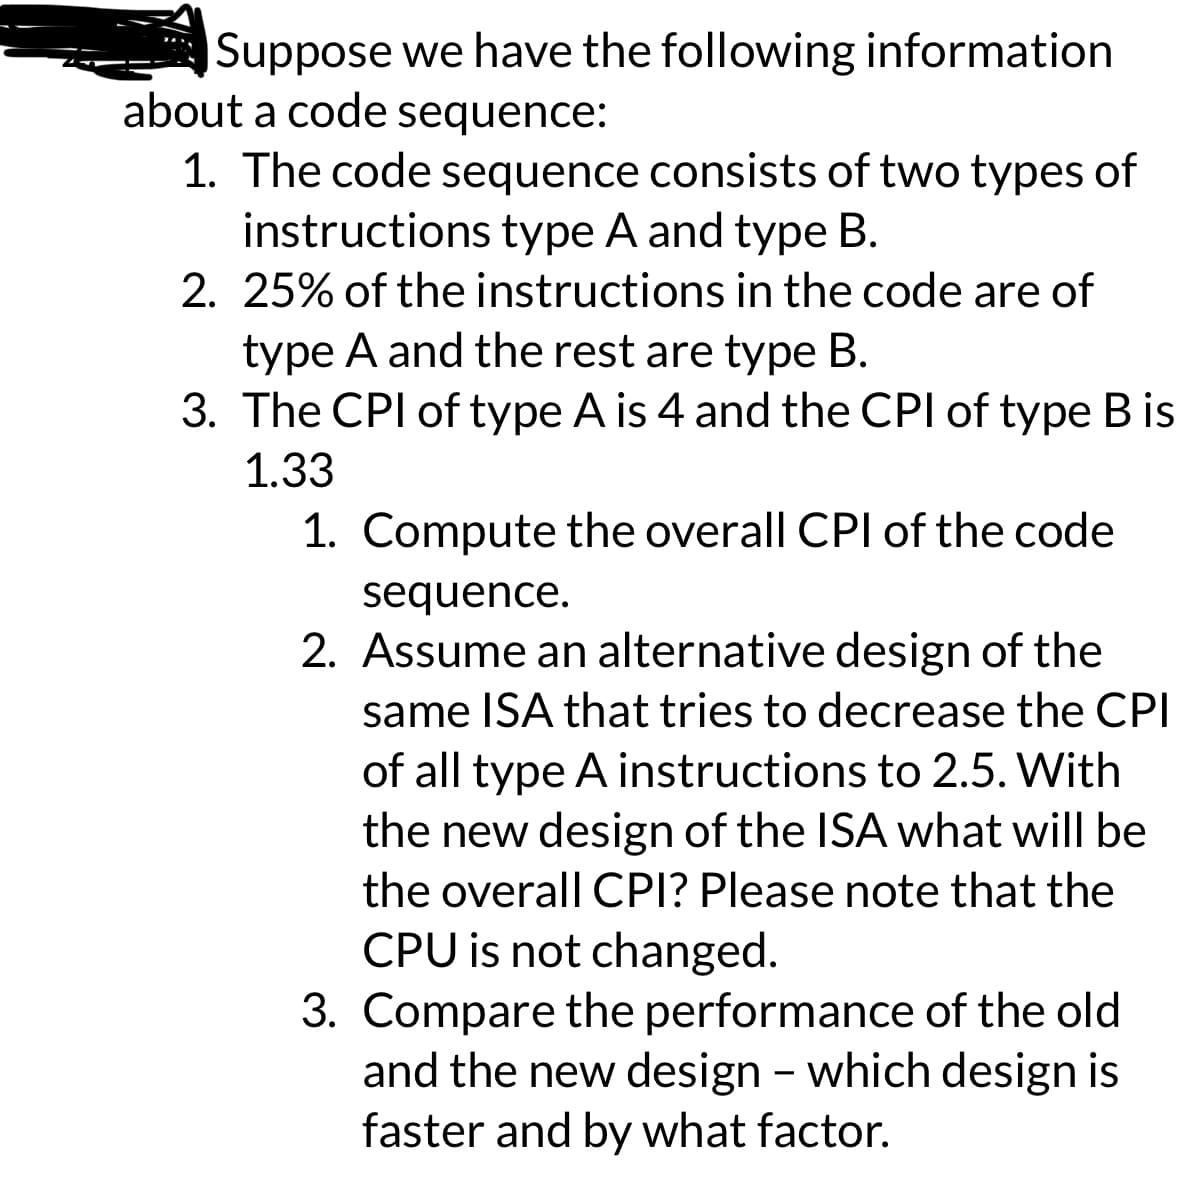 Suppose we have the following information
about a code sequence:
1. The code sequence consists of two types of
instructions type A and type B.
2. 25% of the instructions in the code are of
type A and the rest are type B.
3. The CPI of type A is 4 and the CPI of type B is
1.33
1. Compute the overall CPI of the code
sequence.
2. Assume an alternative design of the
same ISA that tries to decrease the CPI
of all type A instructions to 2.5. With
the new design of the ISA what will be
the overall CPI? Please note that the
CPU is not changed.
3. Compare the performance of the old
and the new design - which design is
faster and by what factor.